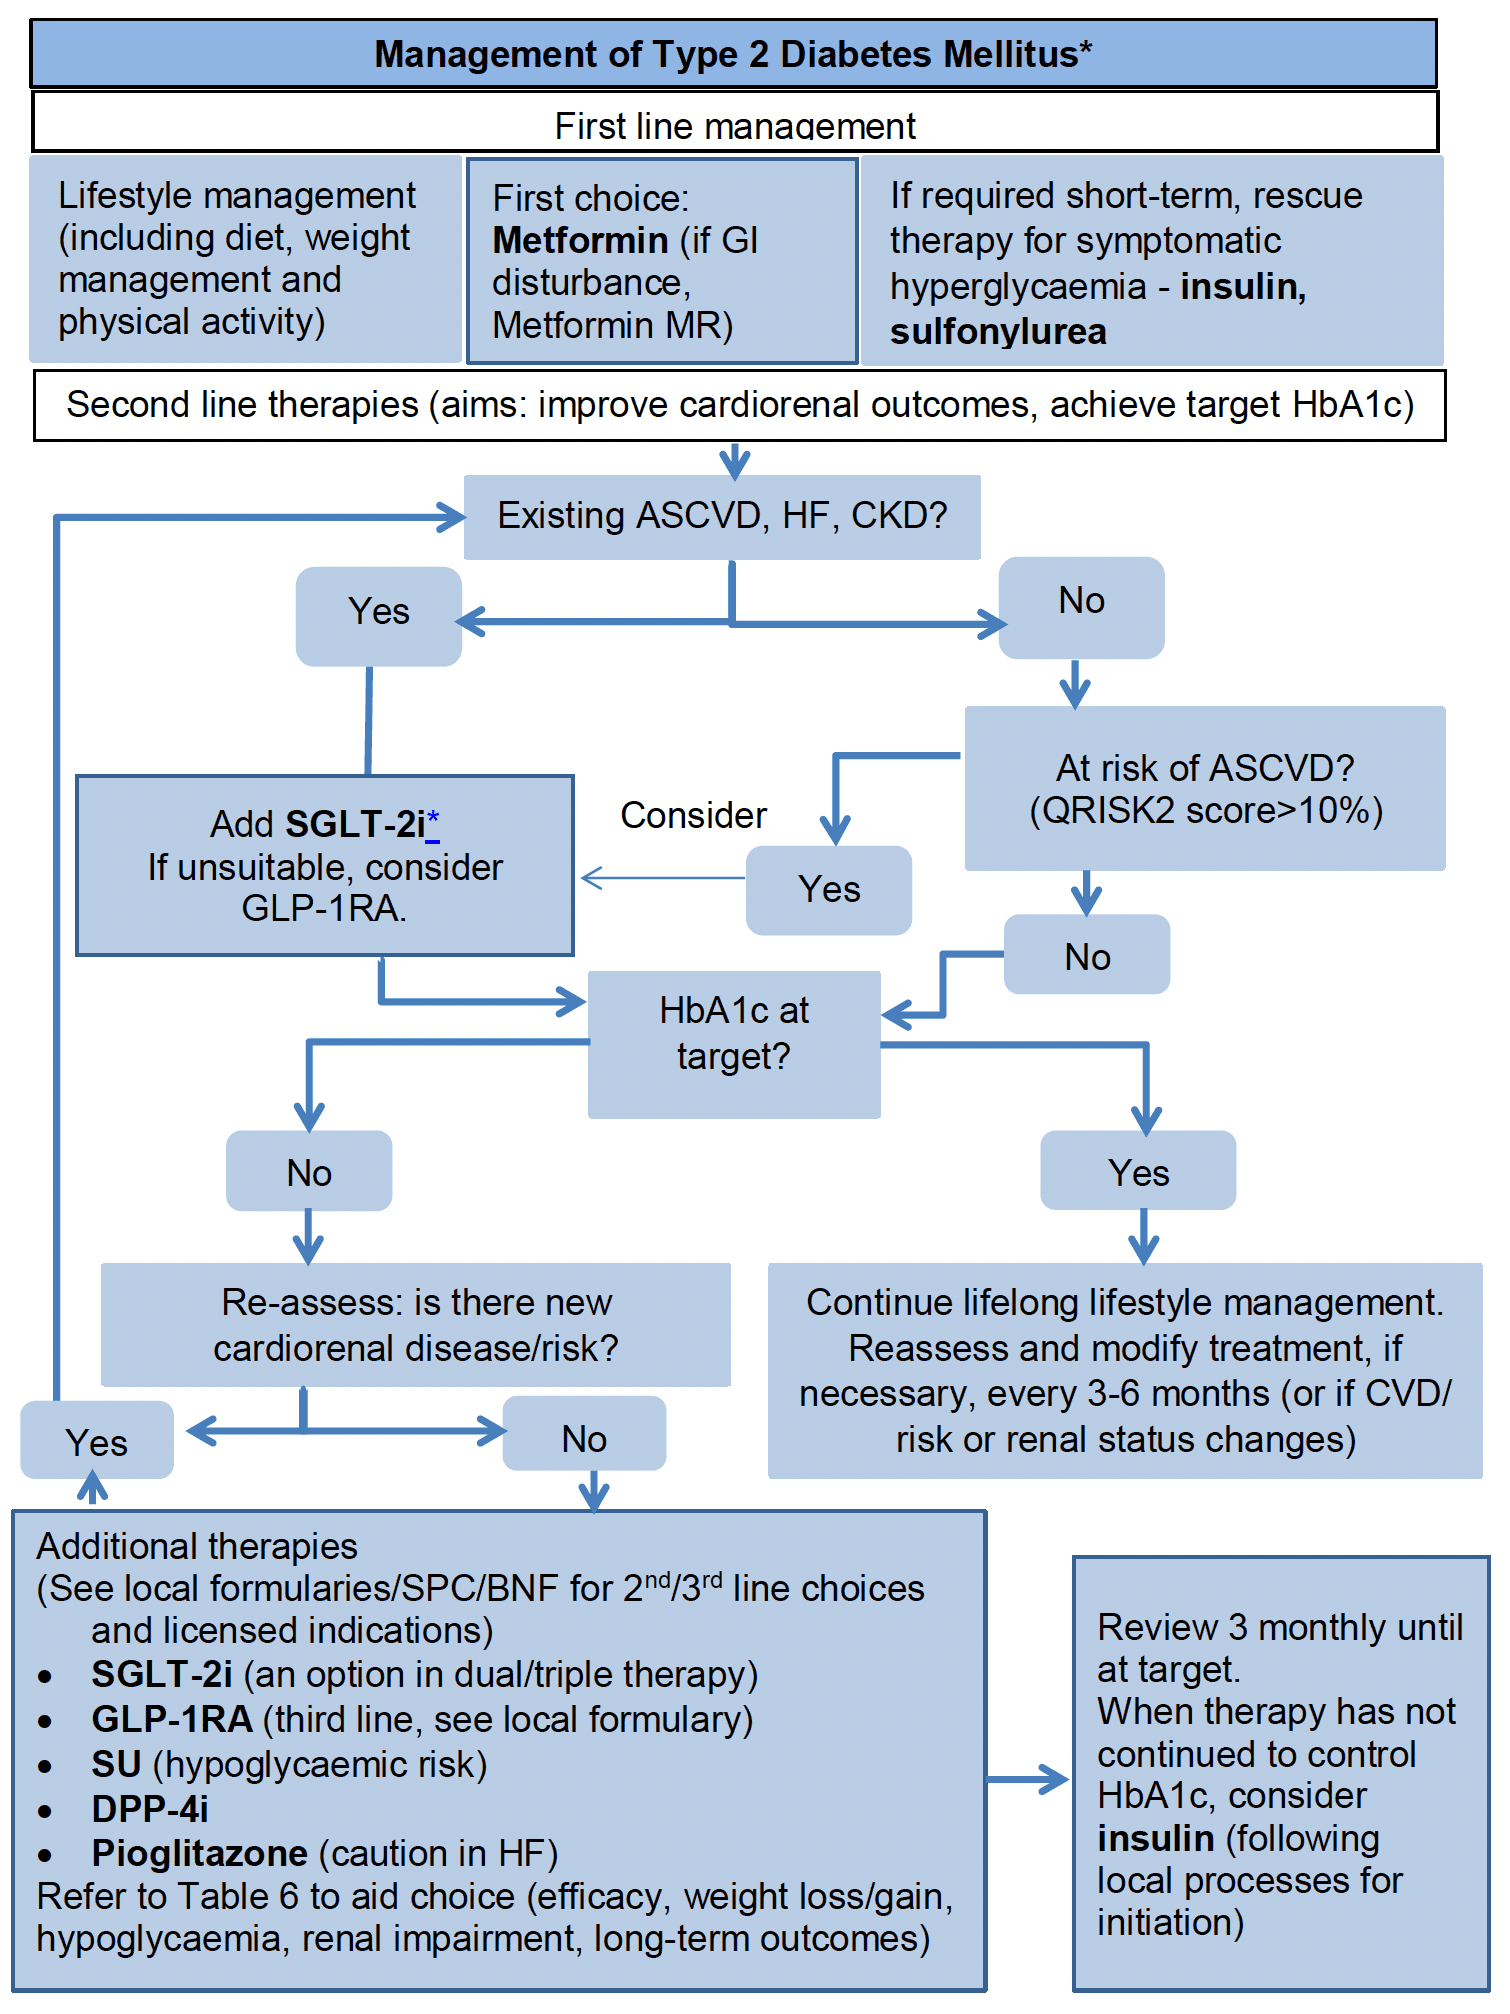 Summary algorithm of prescribing choices in T2DM, for first line management and second line therapies, based on ADA and EASD, and NICE recommendations.